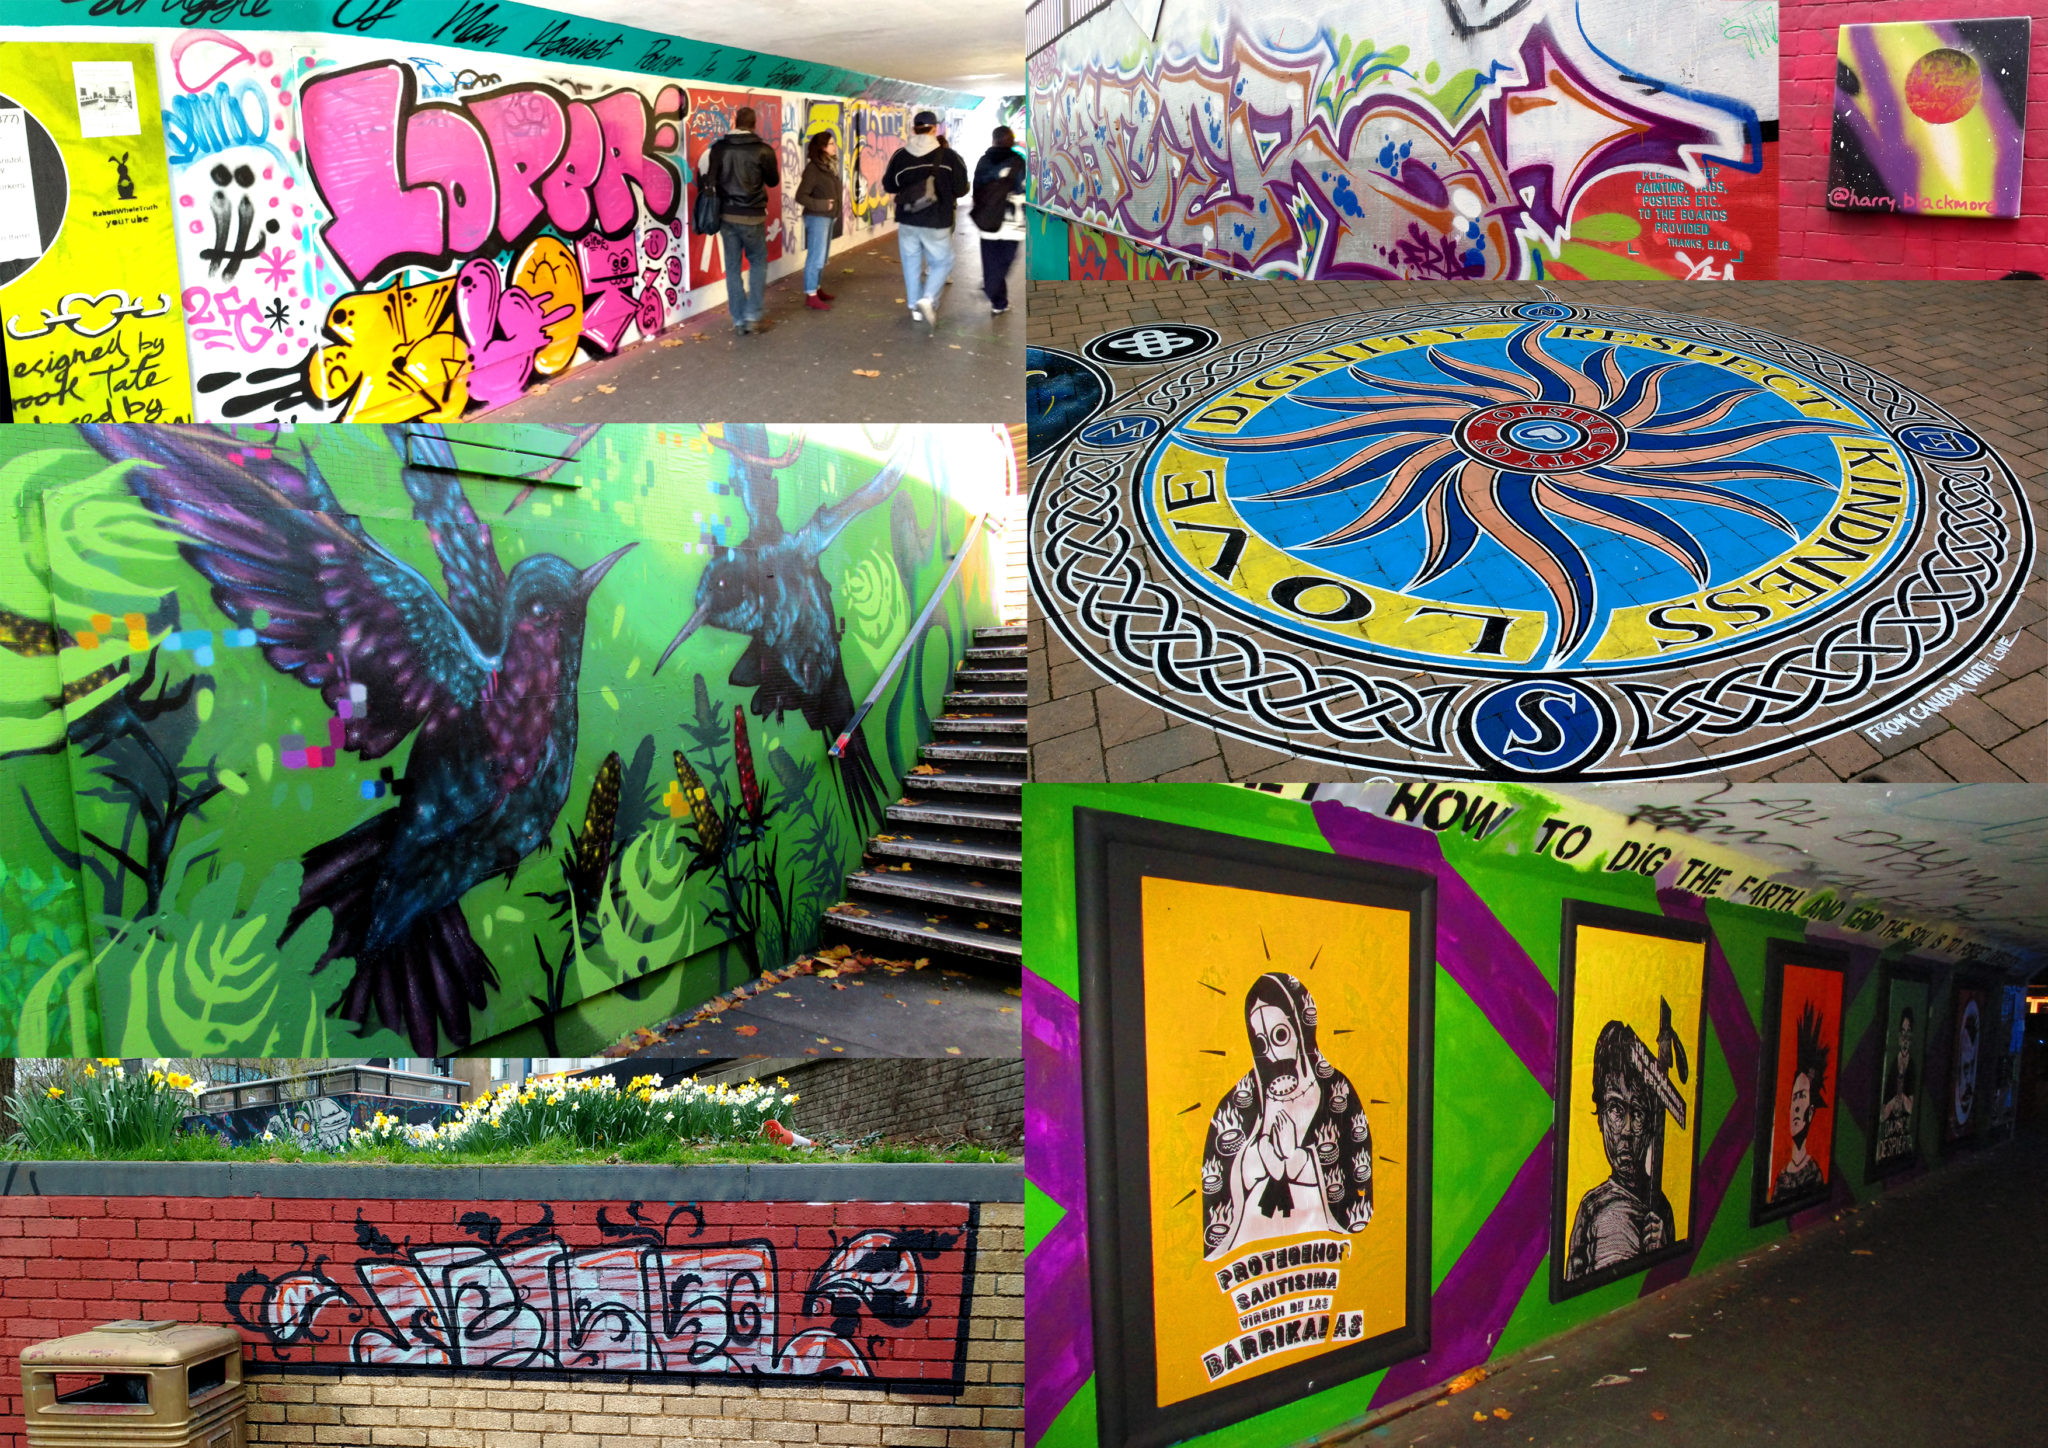 Montage of images of the Bearpit